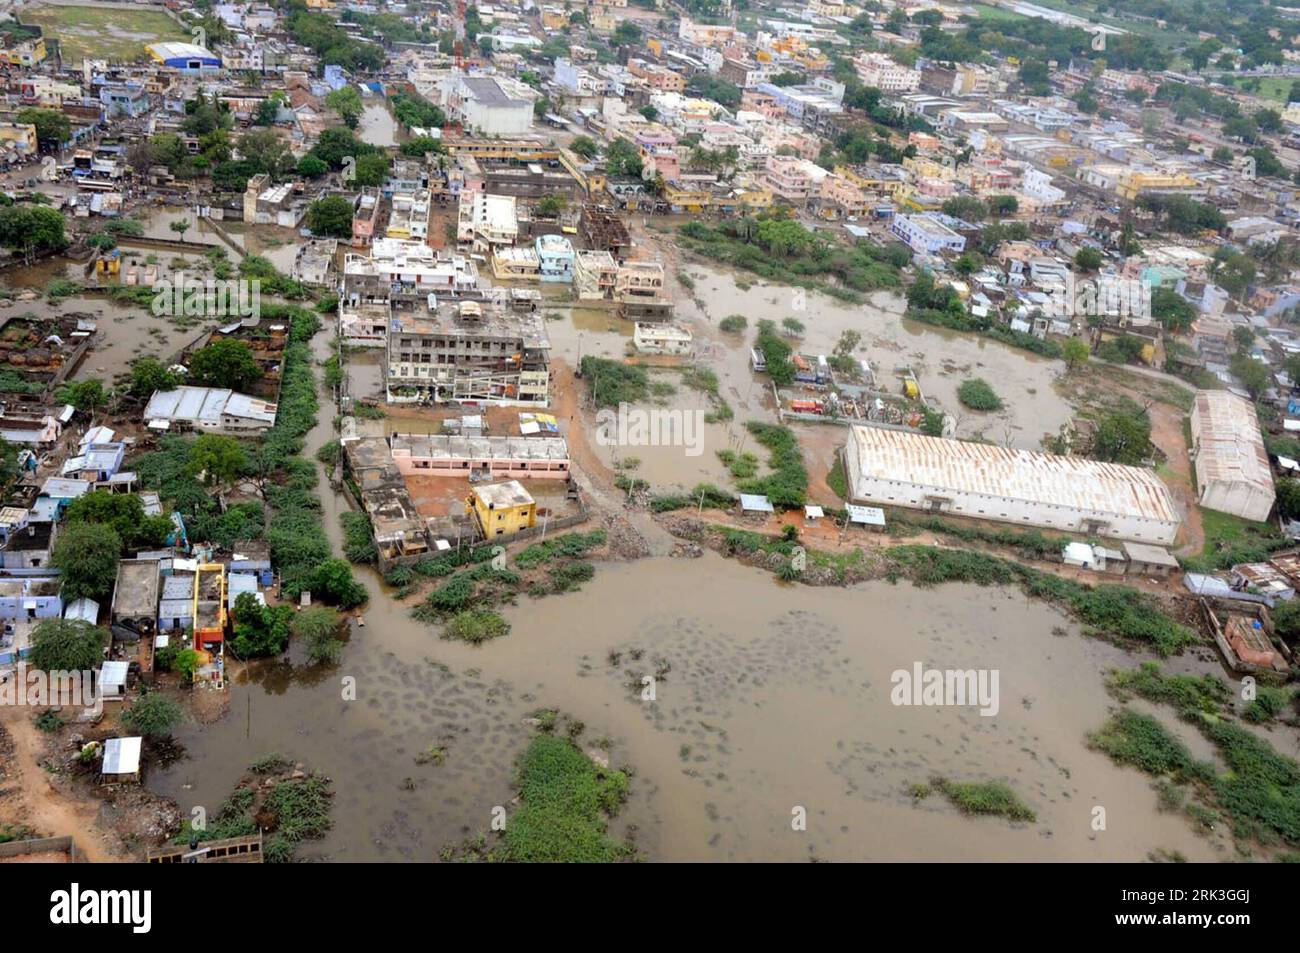 Bildnummer: 53510232  Datum: 04.10.2009  Copyright: imago/Xinhua (091006) -- BANGALORE, Oct. 6, 2009 (Xinhua) -- The photo taken on Oct. 4, 2009 shows an aerial view of flood affected Raichur district in North Karnataka, southern India. As some southern states of India, including Andhra Pradesh and Karnataka, is suffering from flood, rescue work is going on in most of the flooded areas with the help from the central government and other states. (Xinhua/Stringer)(axy) (4)INDIA-SOUTH-FLOOD PUBLICATIONxNOTxINxCHN premiumd Wetter Unwetter Überschwemmung Überflutung Naturkatastrophe Kbdig xdp 2009 Stock Photo